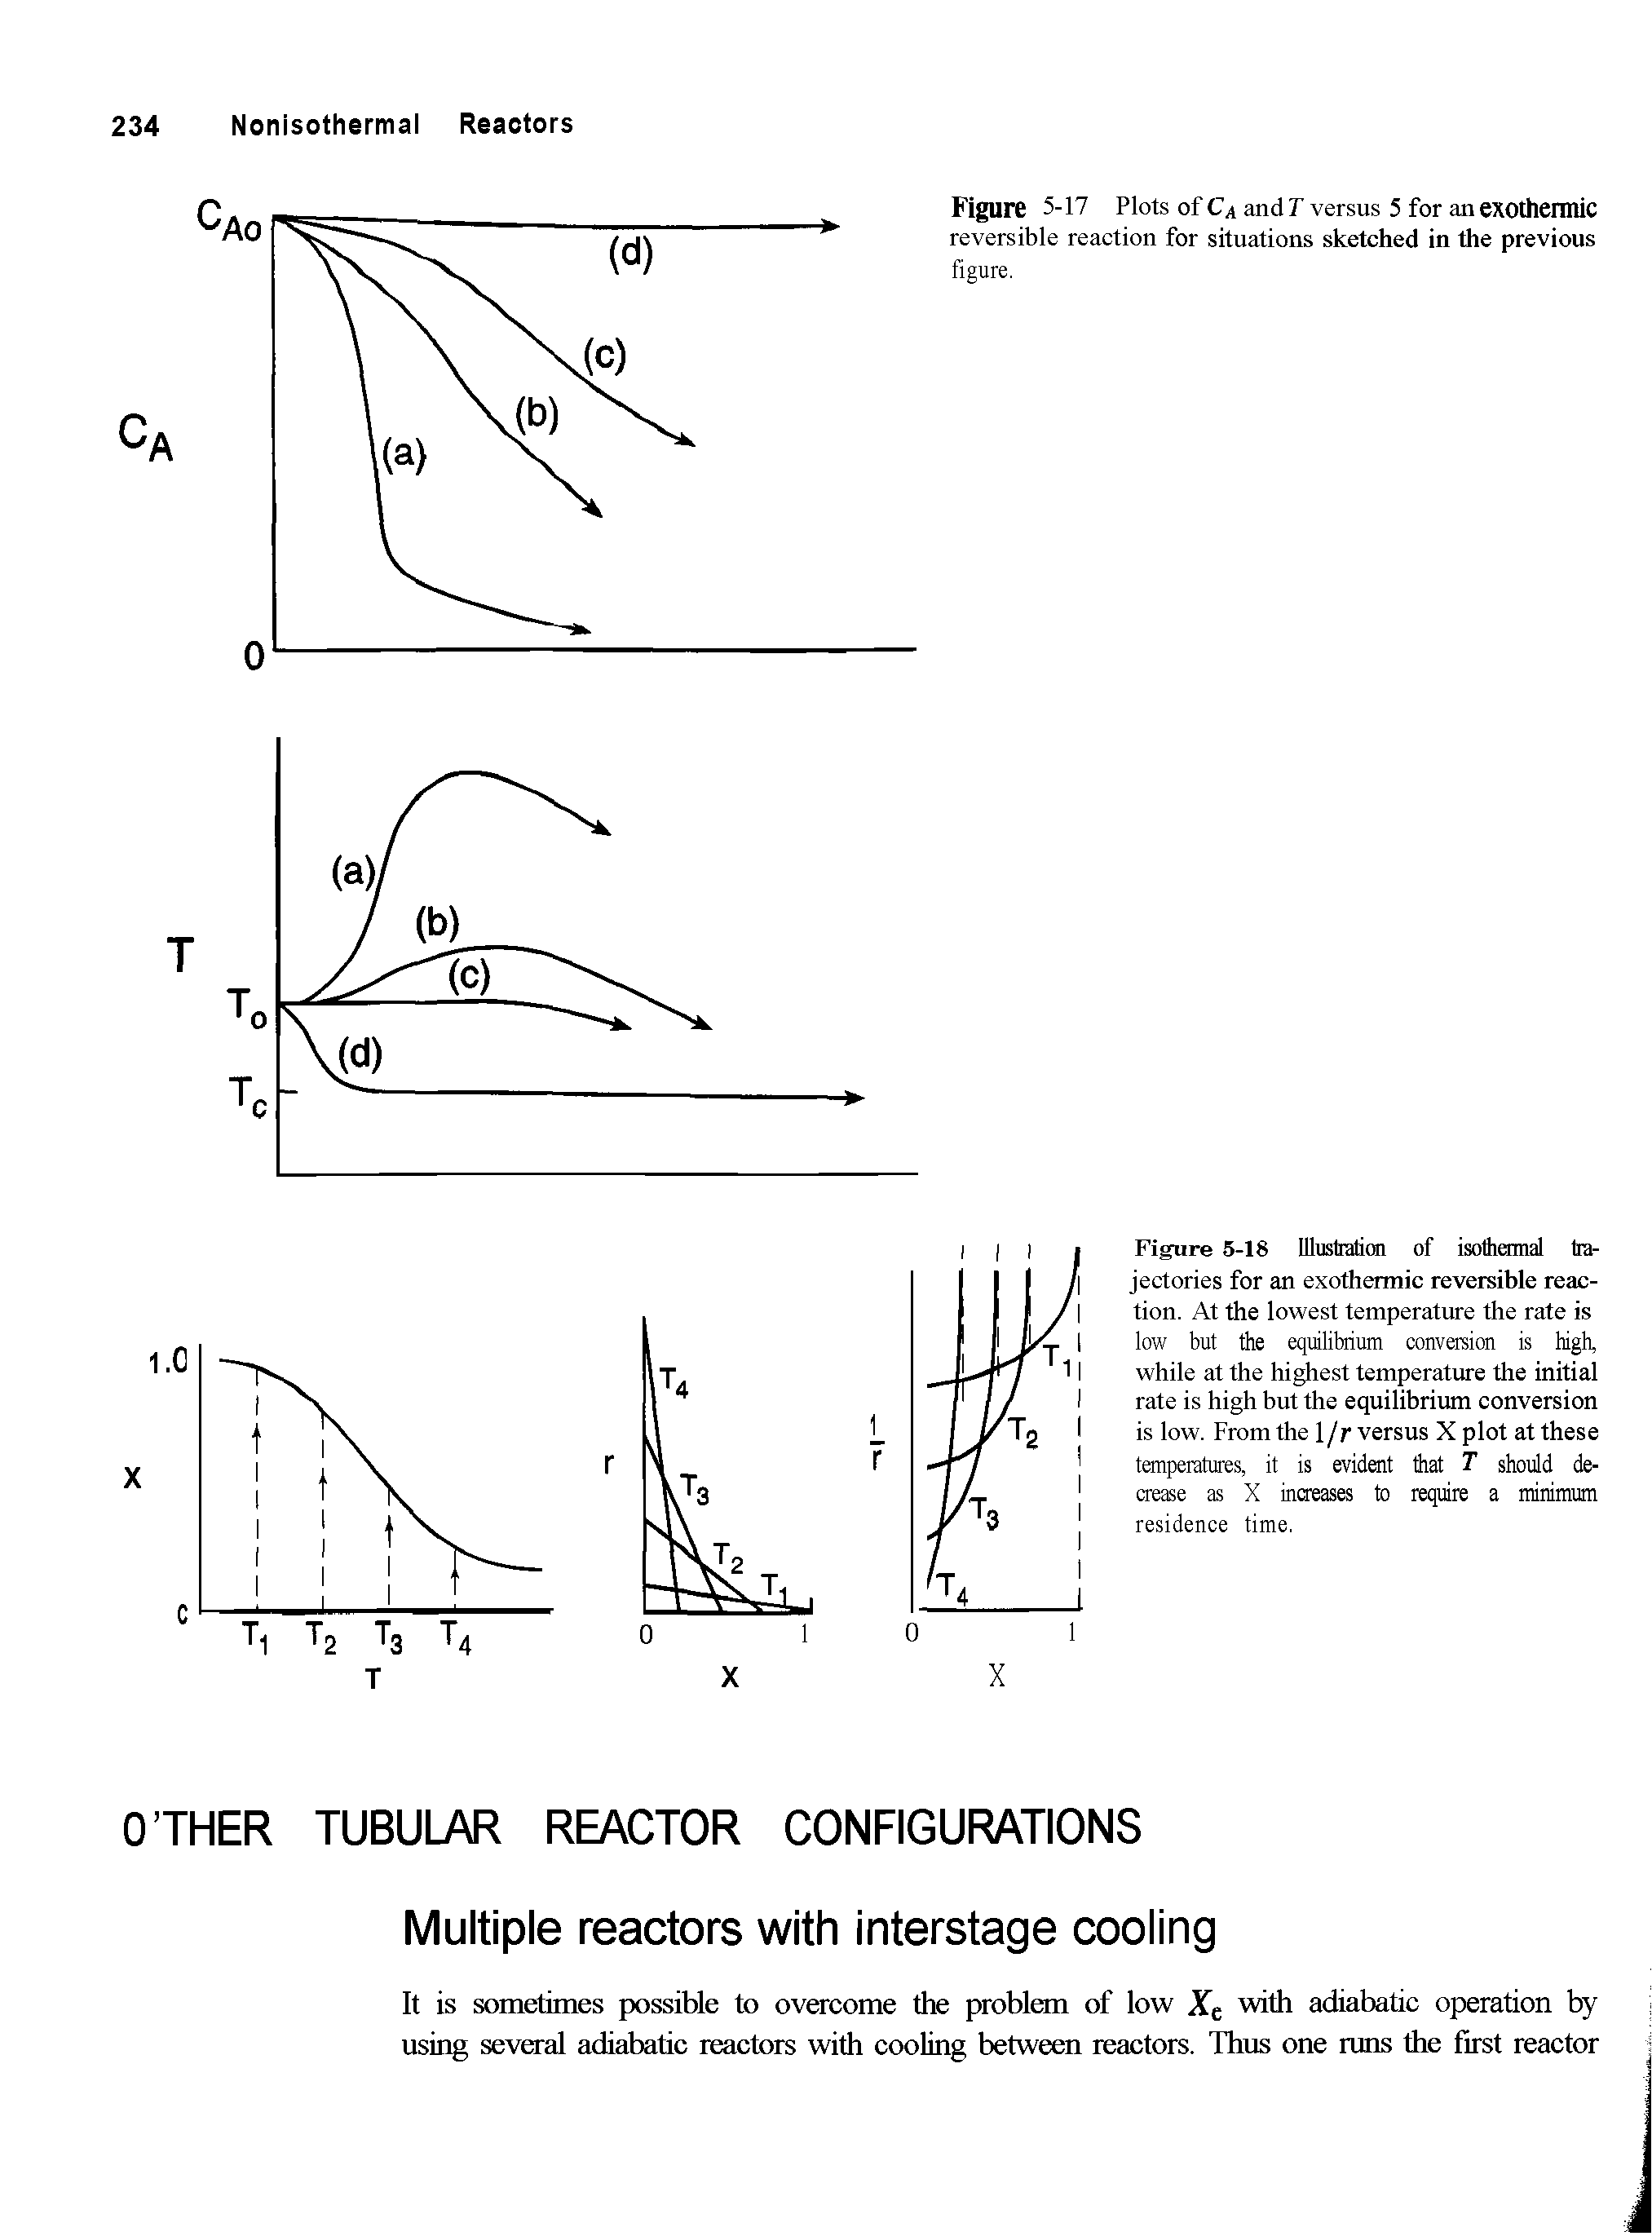 Figure 5-18 Illustration of isothermal trajectories for an exothermic reversible reaction. At the lowest temperature the rate is low but the eqmlibiium conversion is high, while at the highest temperature the initial rate is high but the equilibrium conversion is low. From the 1/r versus X plot at these temperatures, it is evident that T should decrease as X increases to require a minimum residence time,...